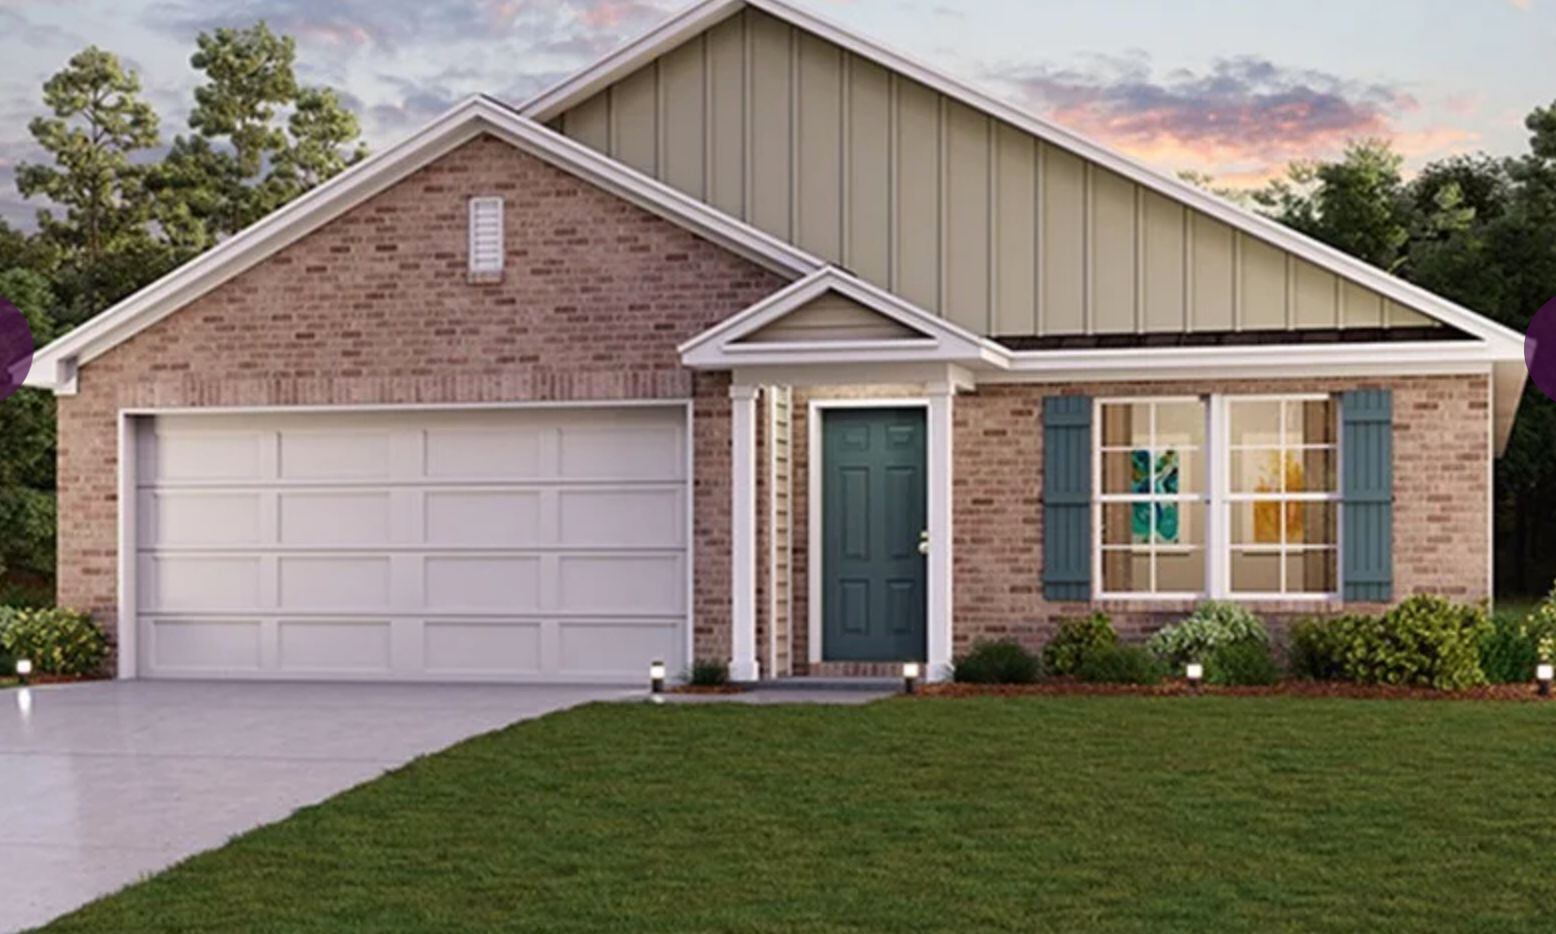 Century Communities’ most affordable North Texas homes will be in the Middlefield Estates...